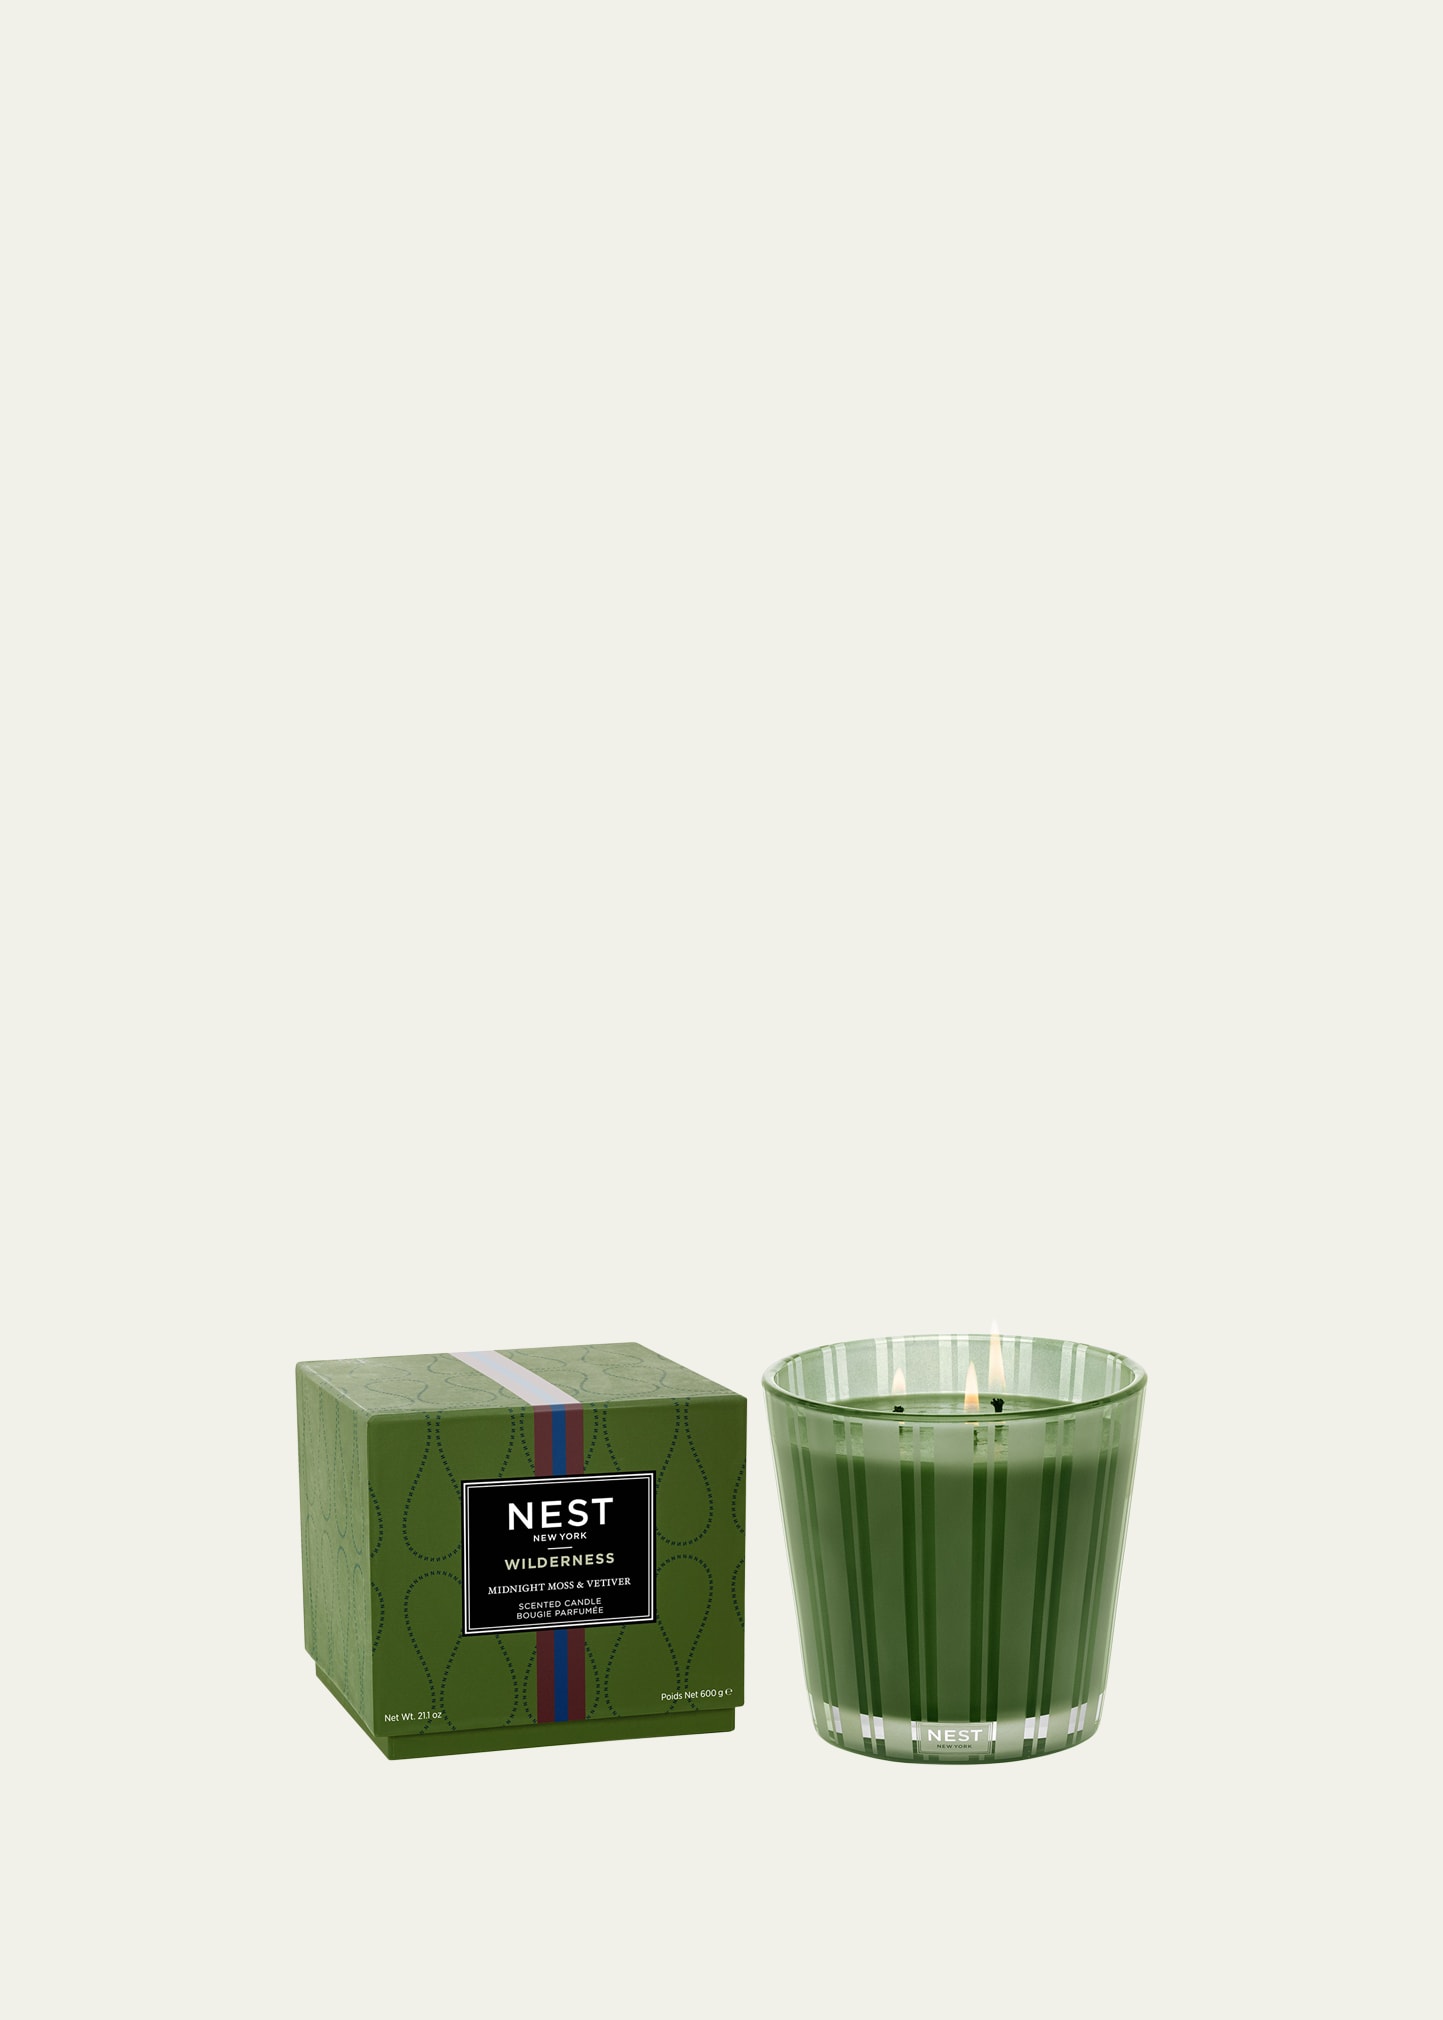 Wilderness Midnight Moss and Vetiver 3-Wick Candle, 21.2 oz.